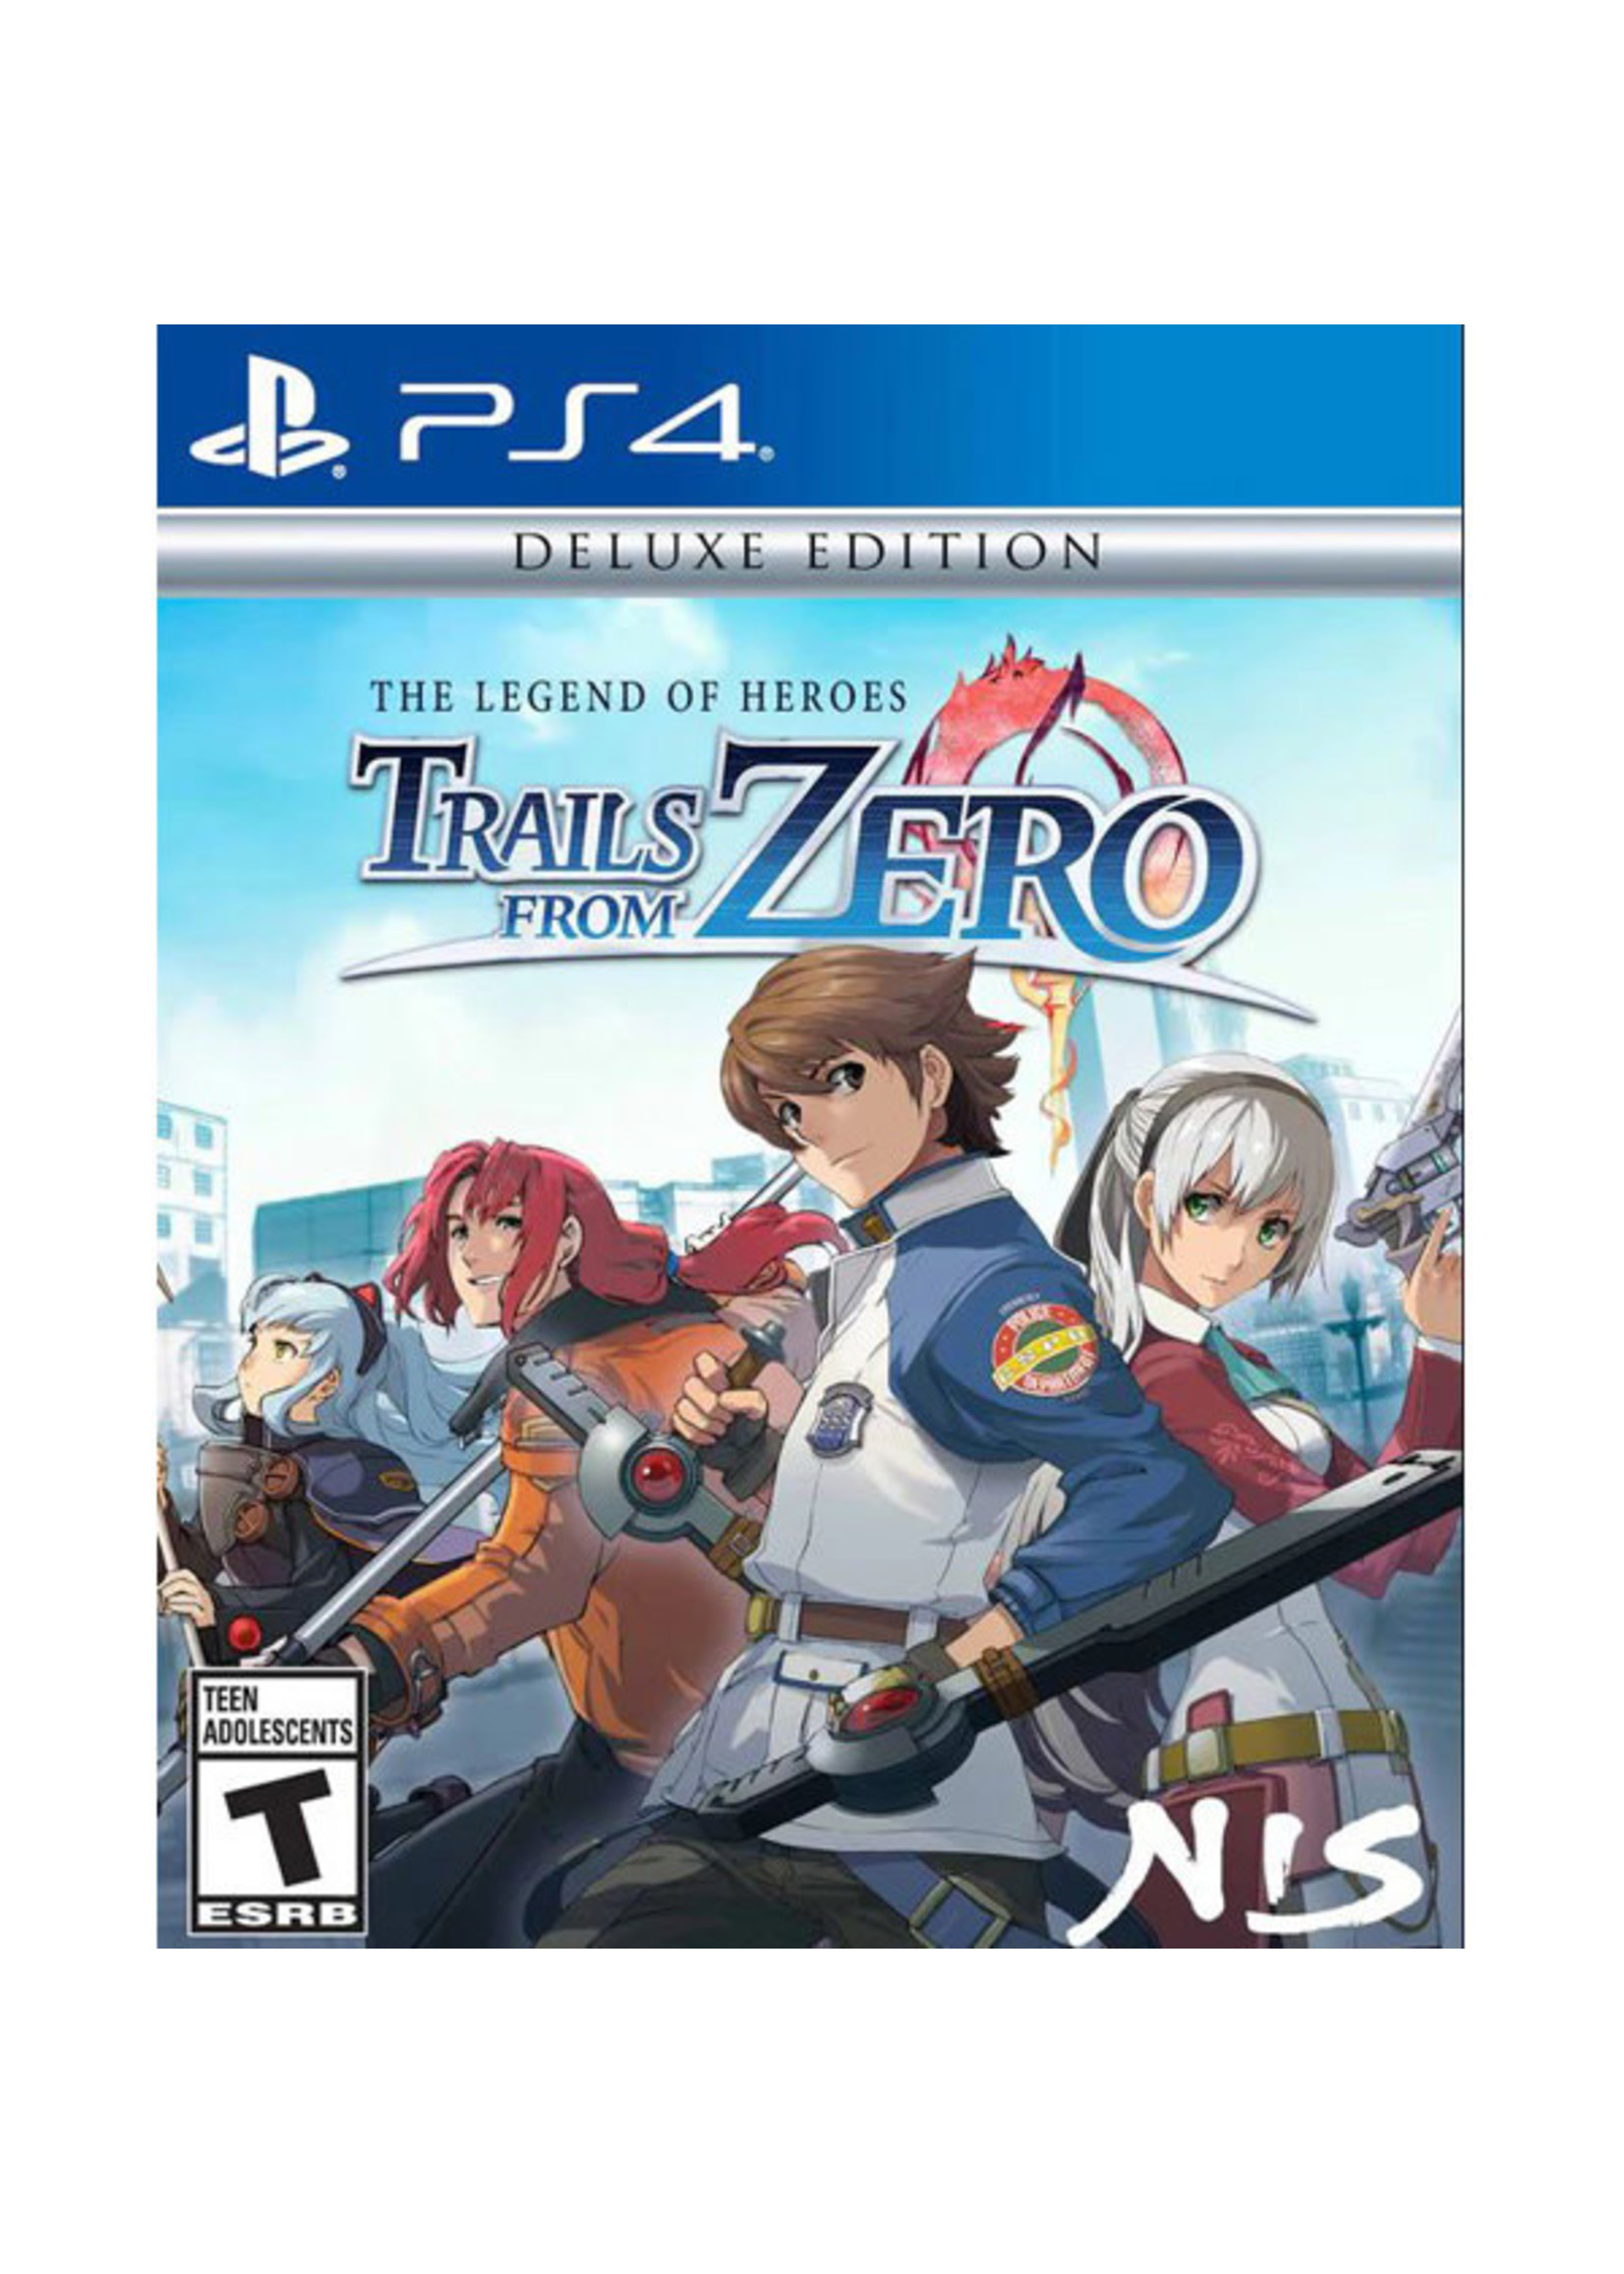 LEGEND OF HEROES TRAILS FROM ZERO PS4